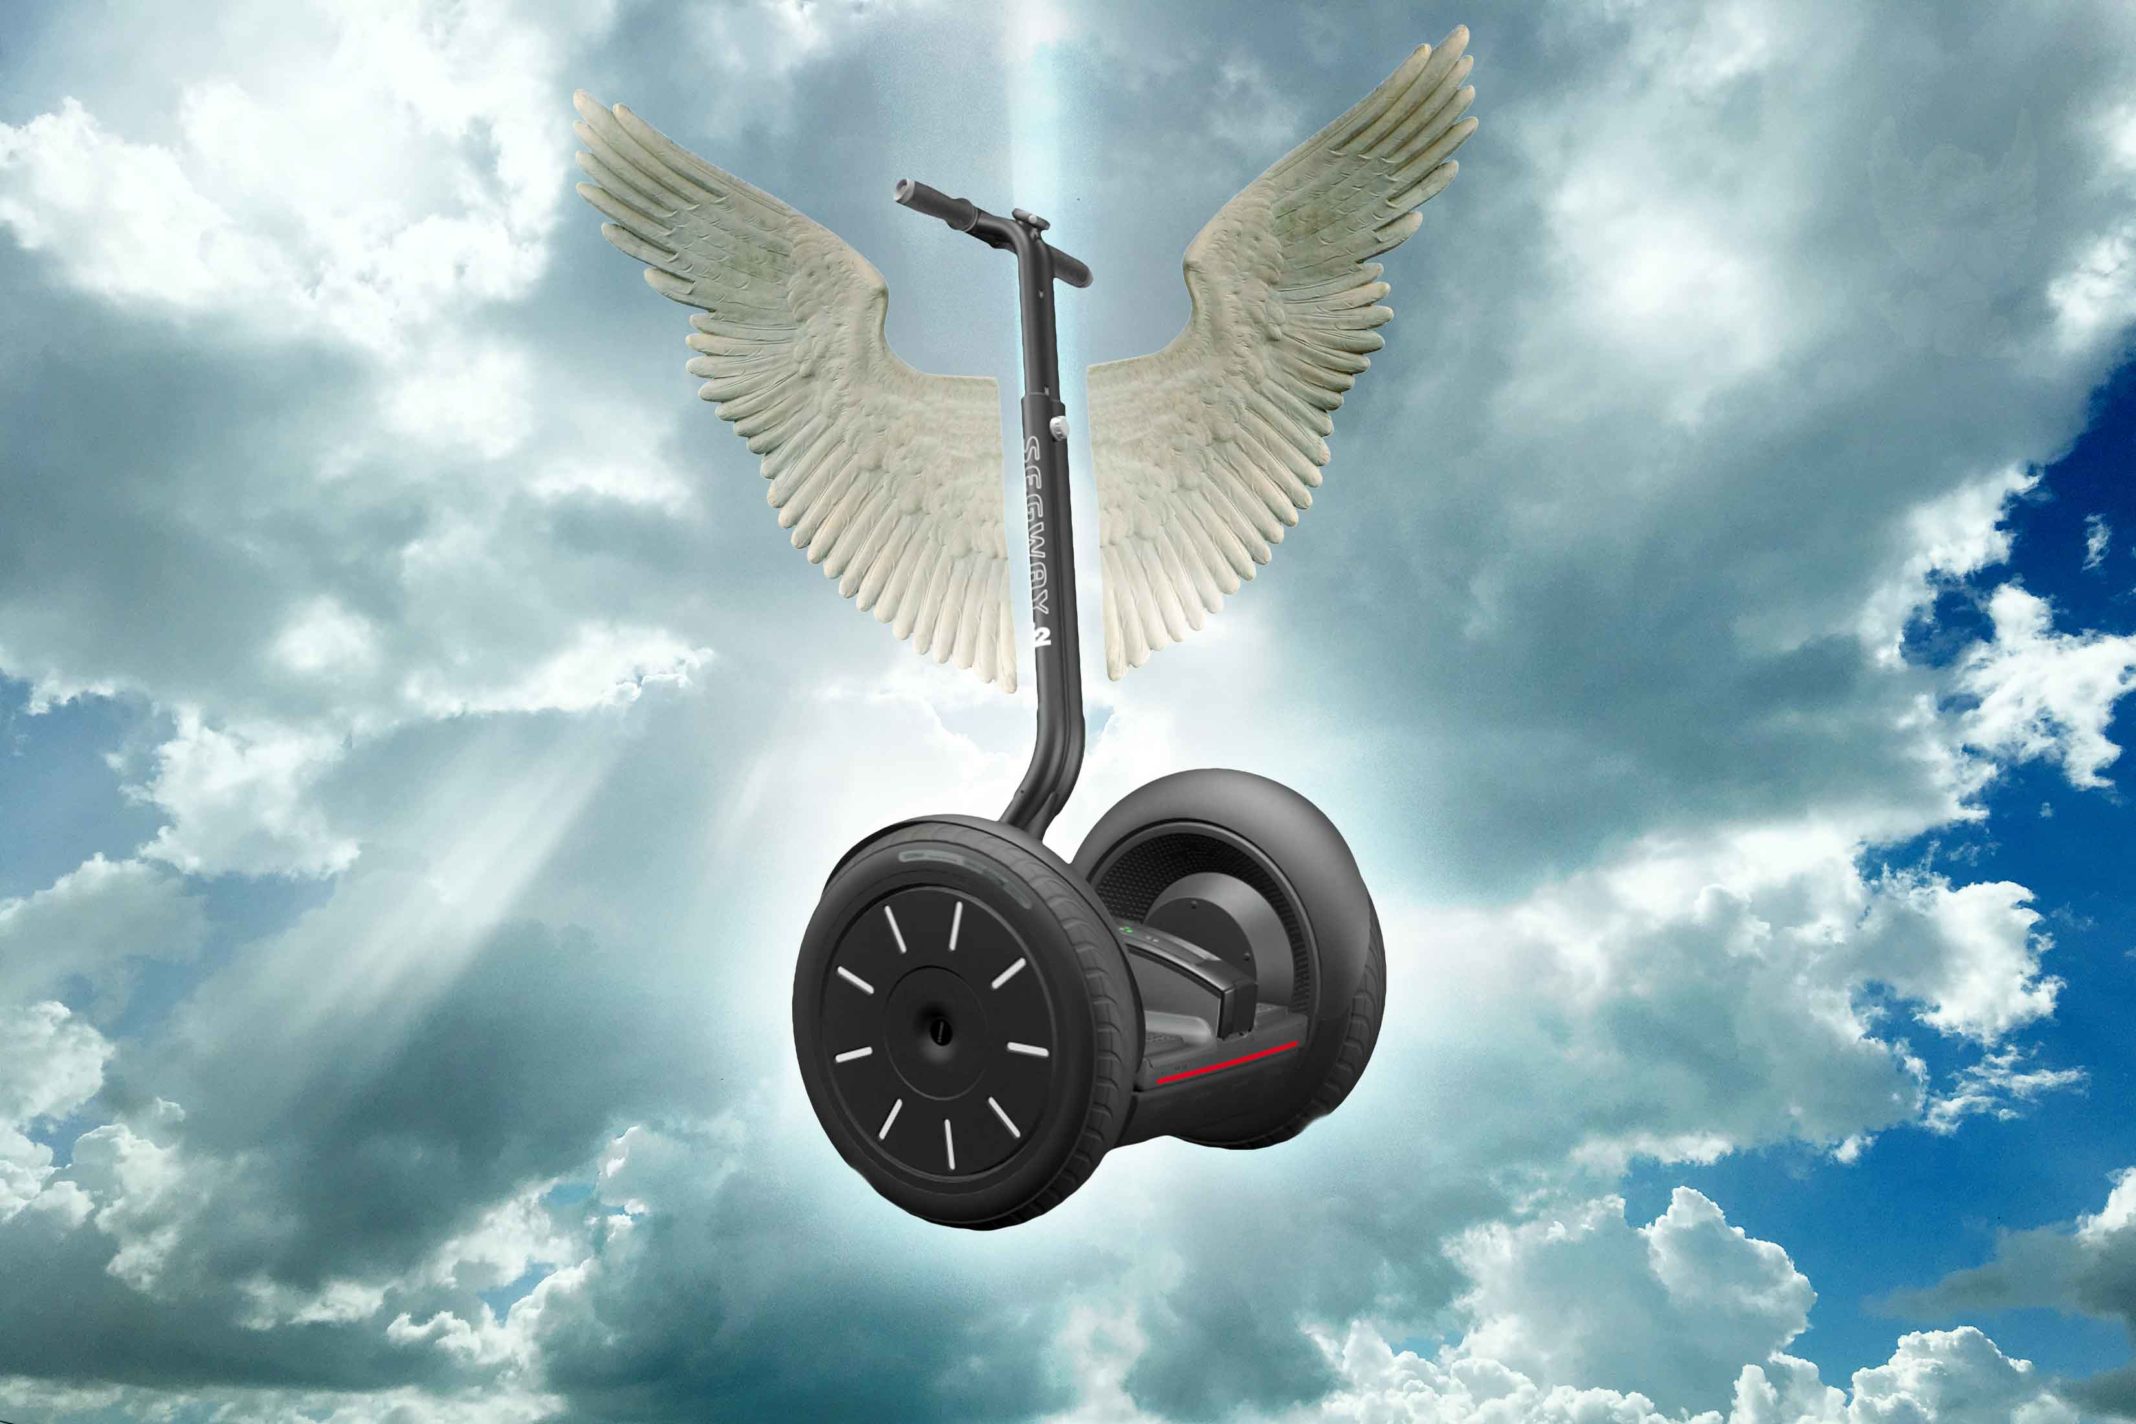 Segway CEO Dies In Bizarre 'Death By Segway' Accident